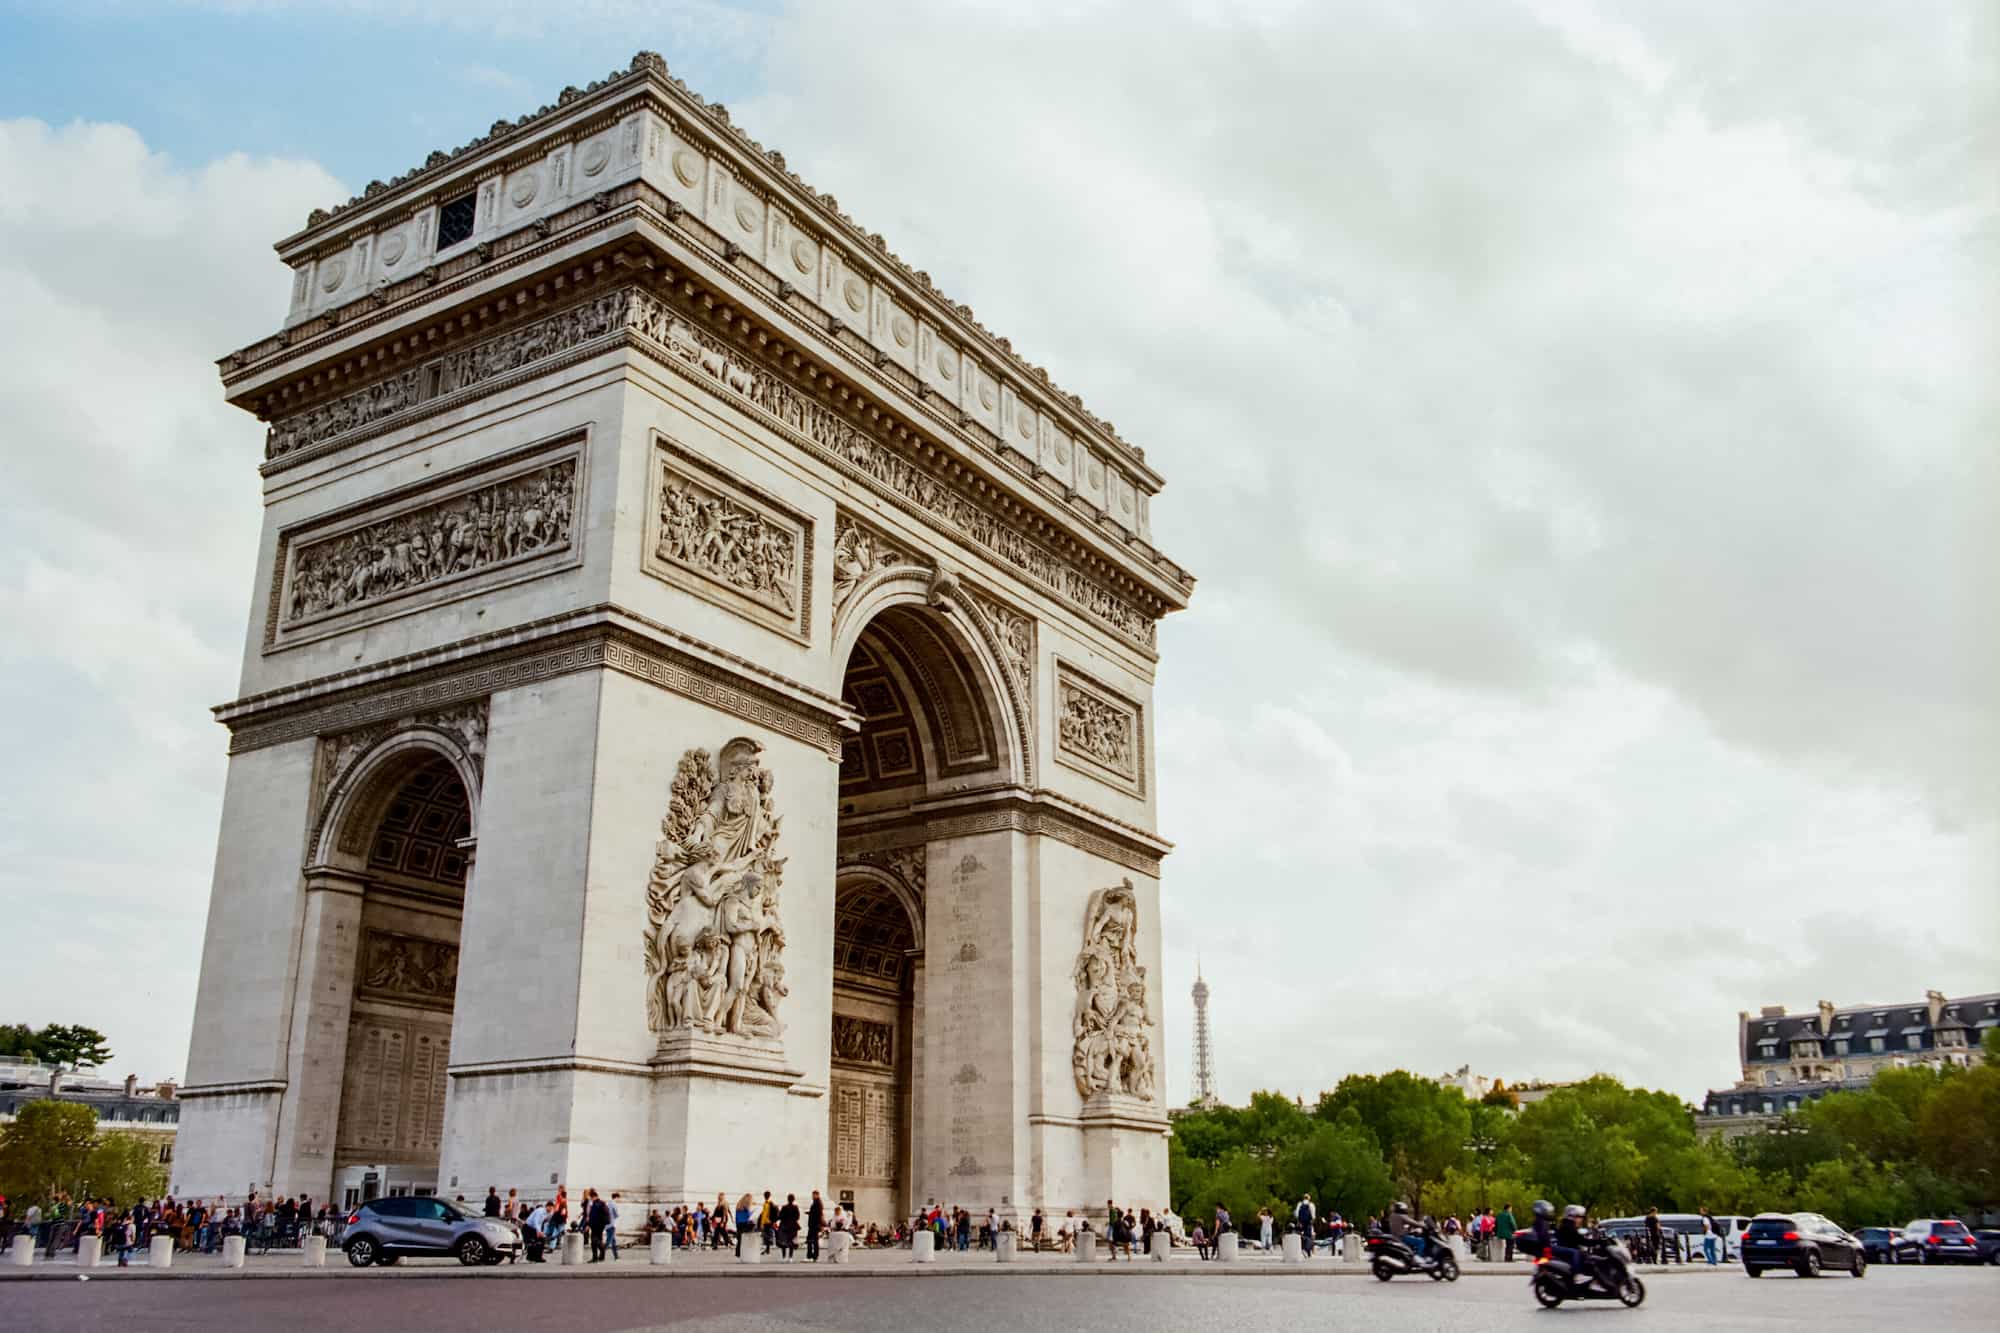 The Arc de Triomphe stands regally at sunset with the Eiffel Tower peeking in the background. Visitors mill about at the base, as motorists zip through the traffic circle. 